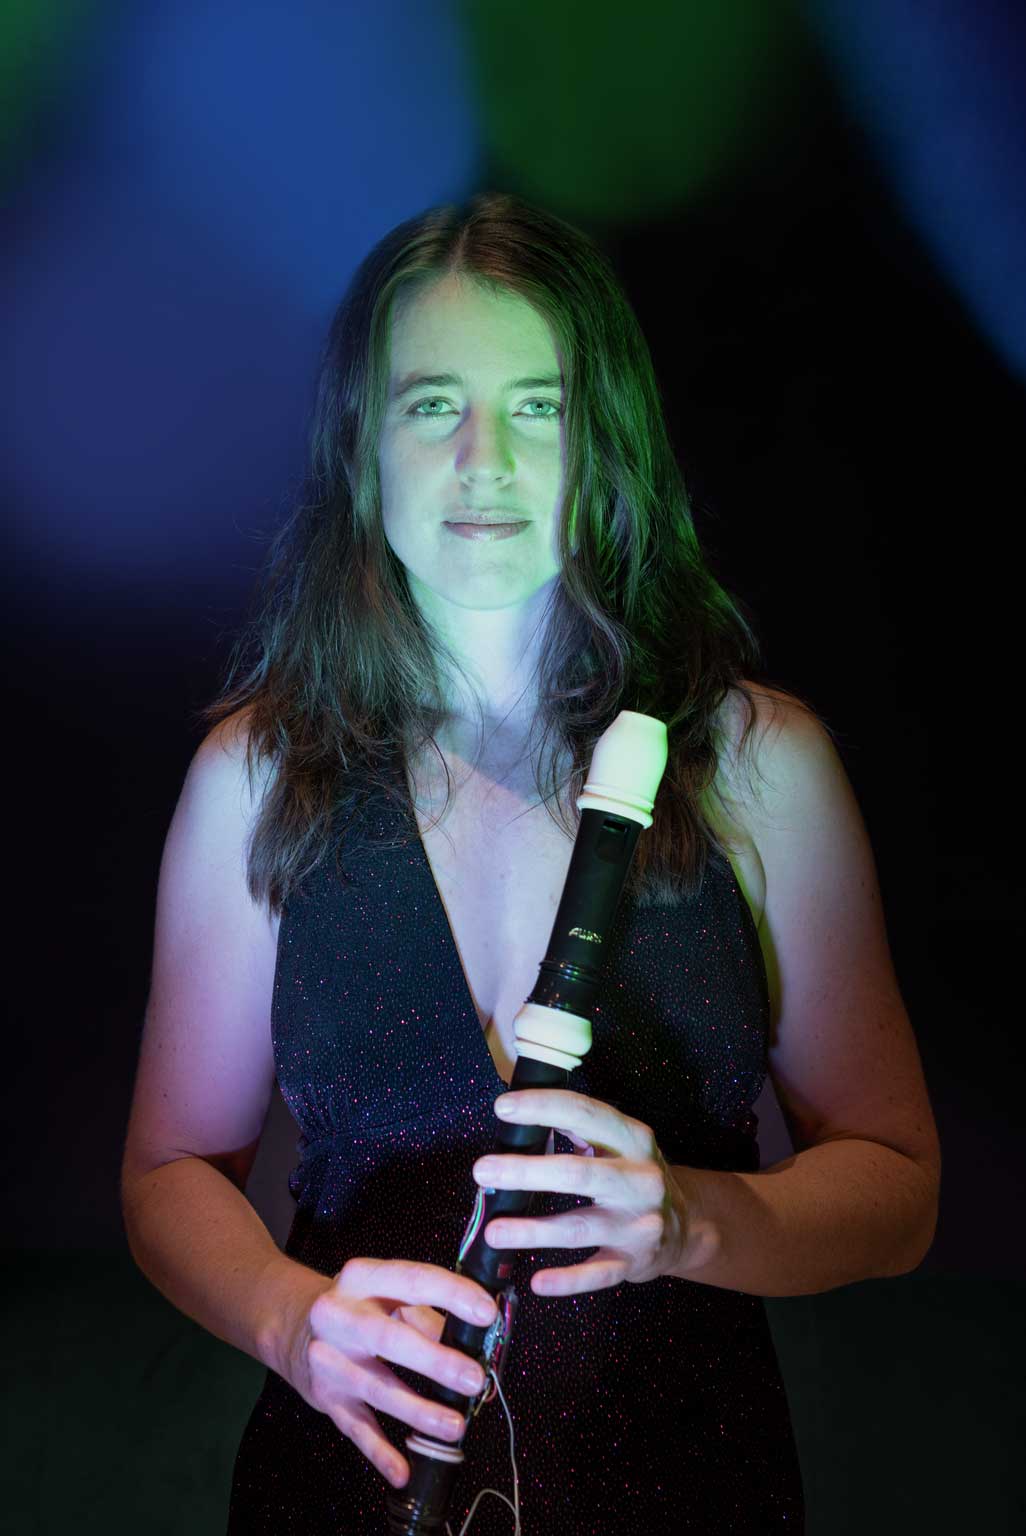 A woman holding a recorder